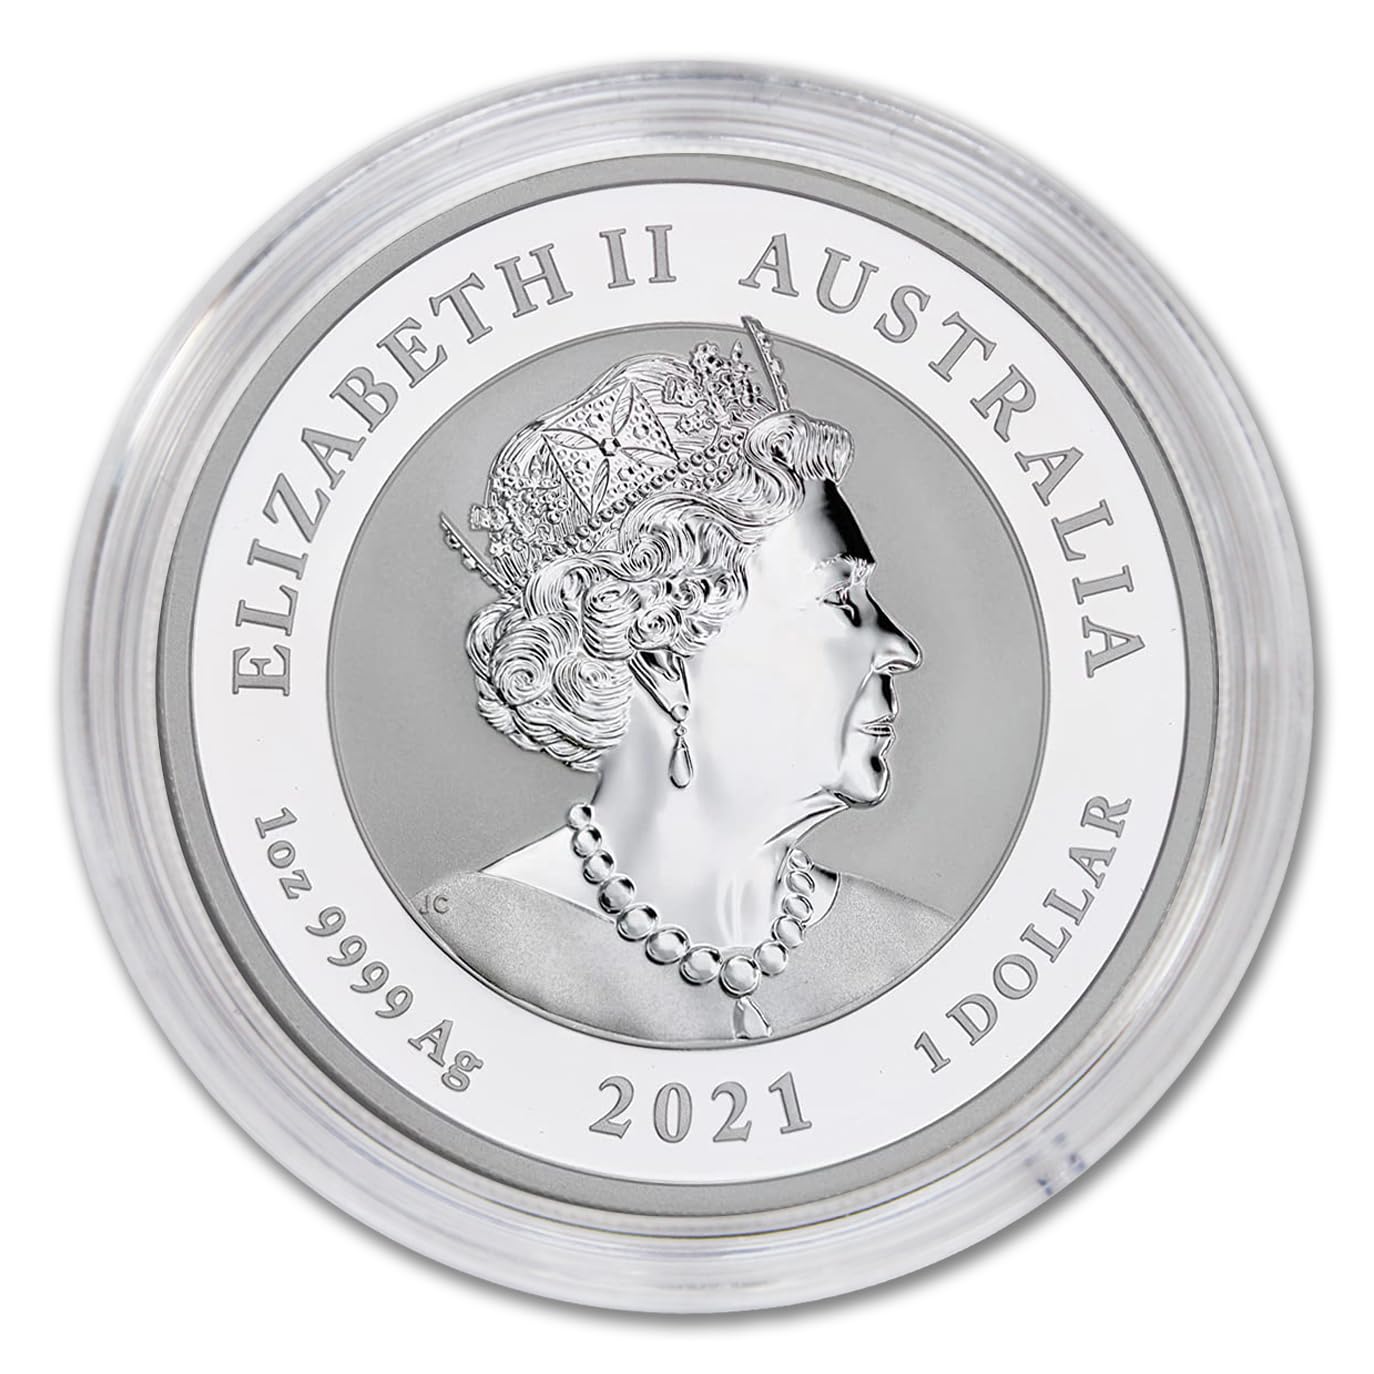 2021 P 1 oz Australian Silver Myths & Legends Dragon Coin Brilliant Uncirculated (BU - in Capsule) with Certificate of Authenticity $1 Seller Mint State